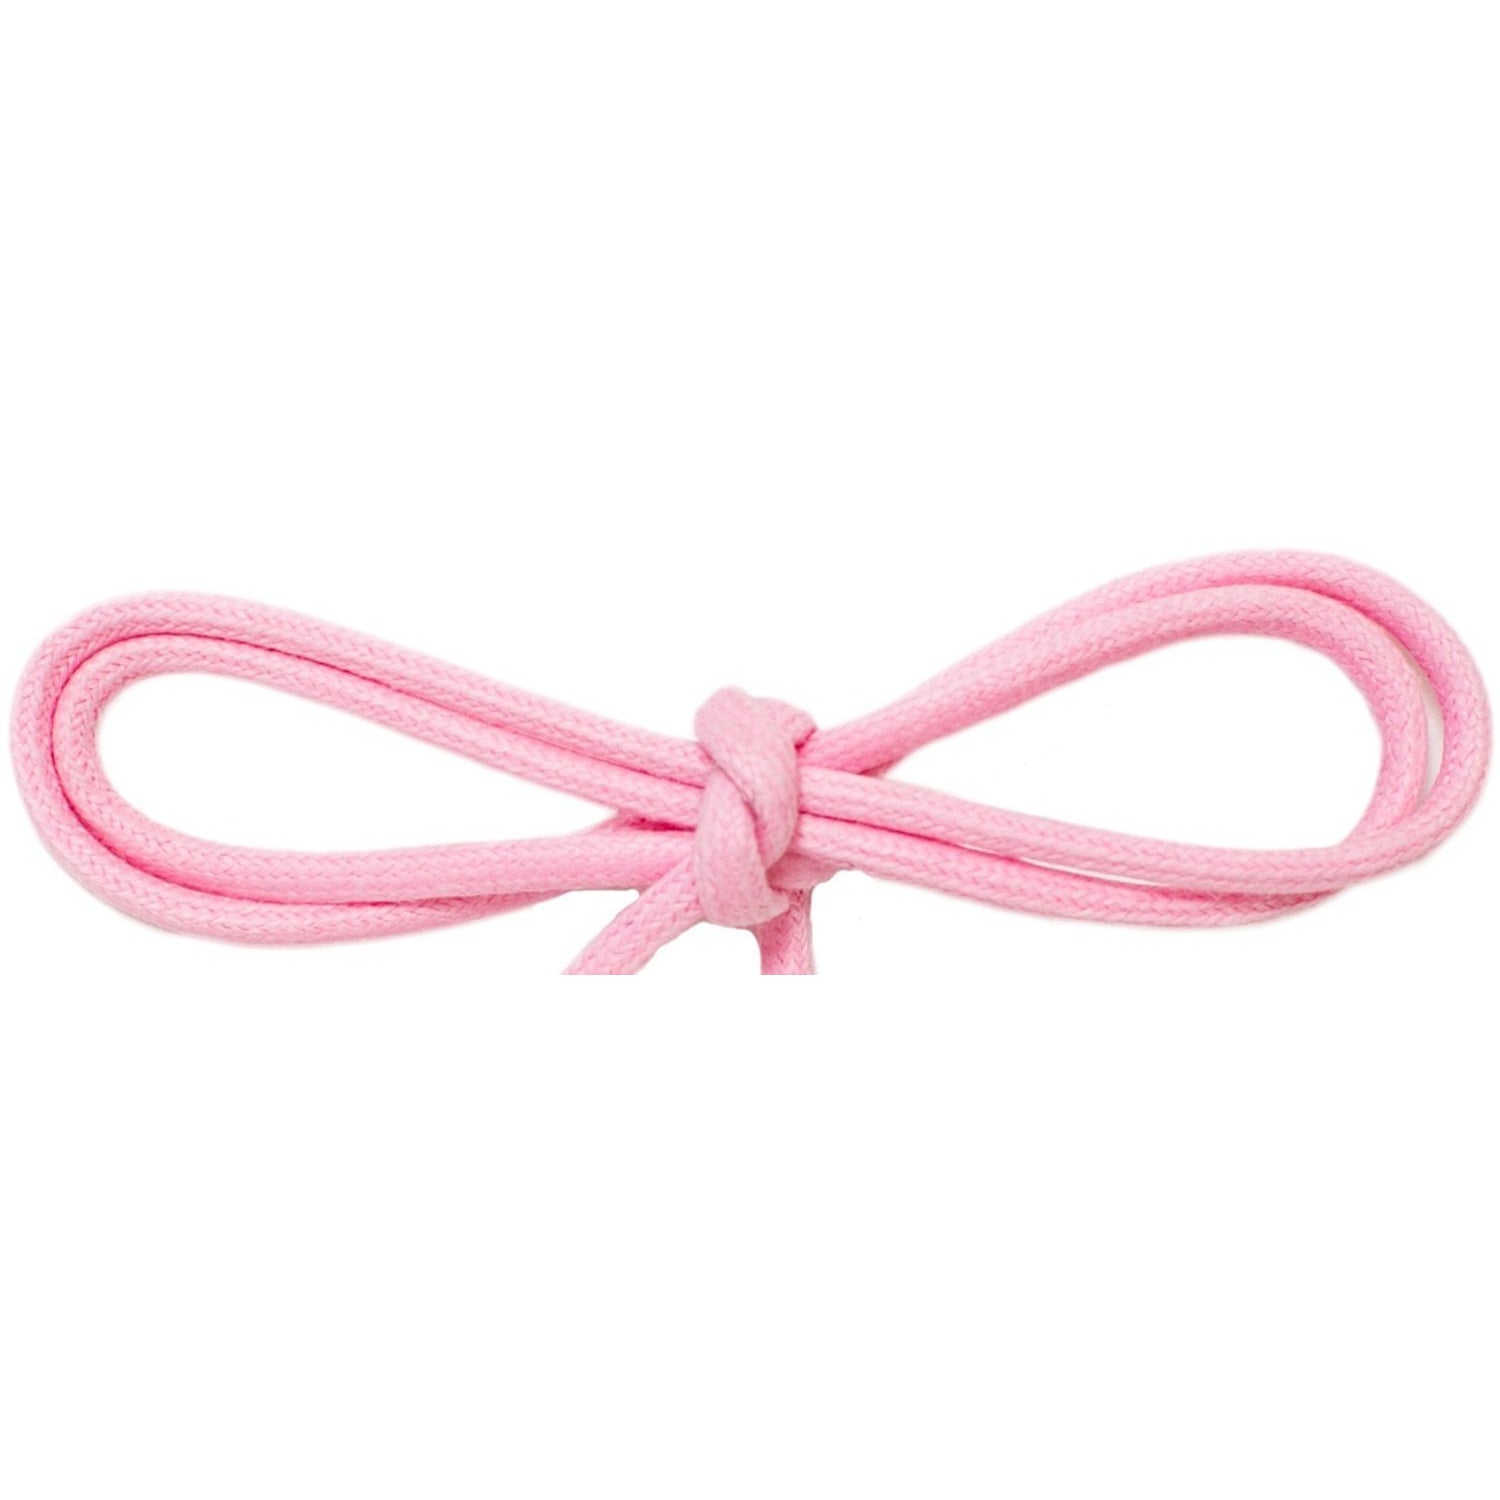 Wholesale Waxed Cotton Thin Round DRESS Laces 1/8'' - Pastel Pink (12 Pair Pack) Shoelaces